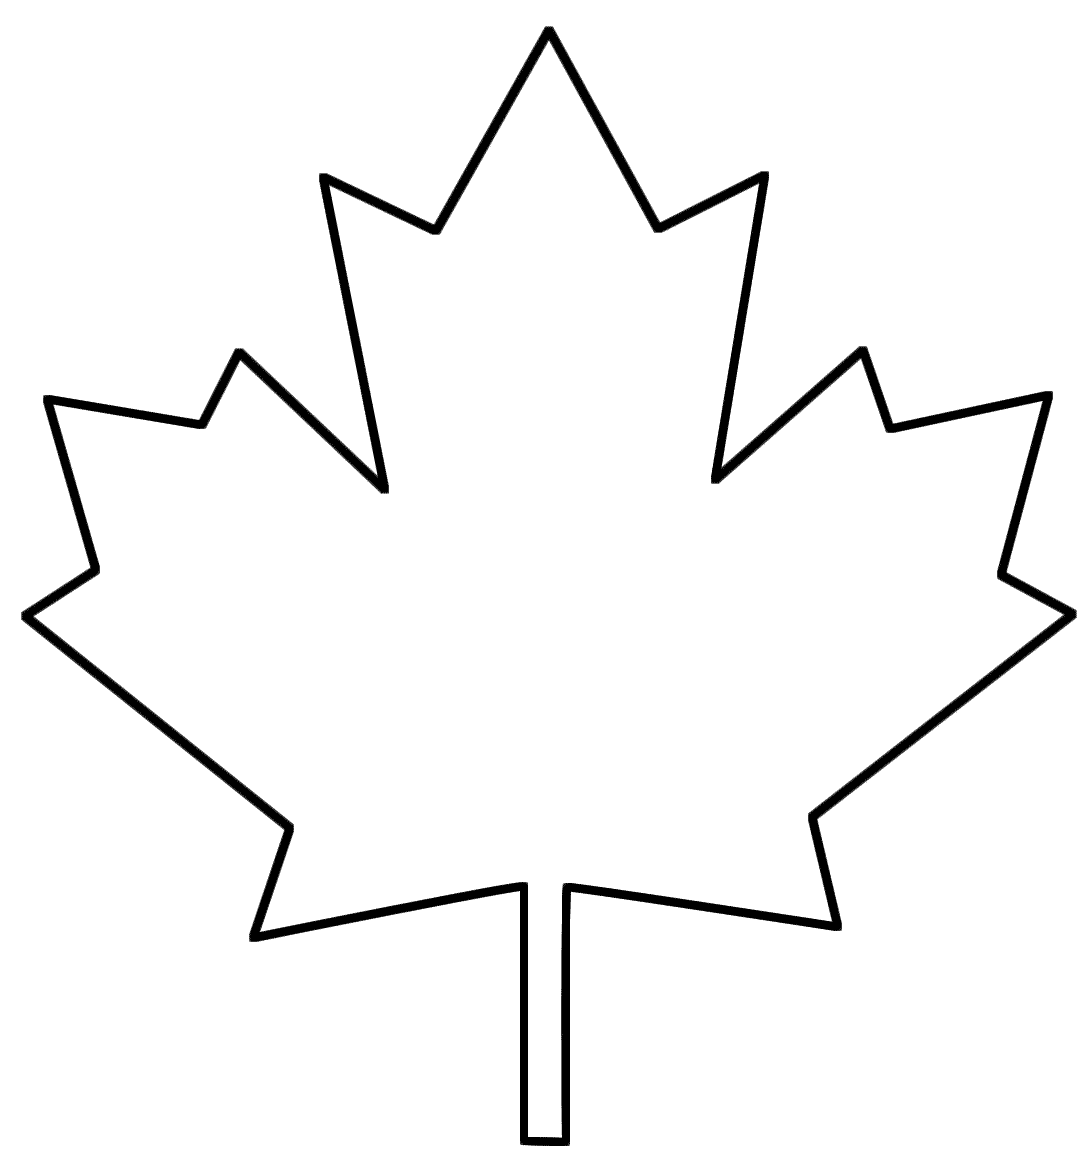 Maple Leaf Clipart Black And White | Clipart Panda - Free Clipart ...